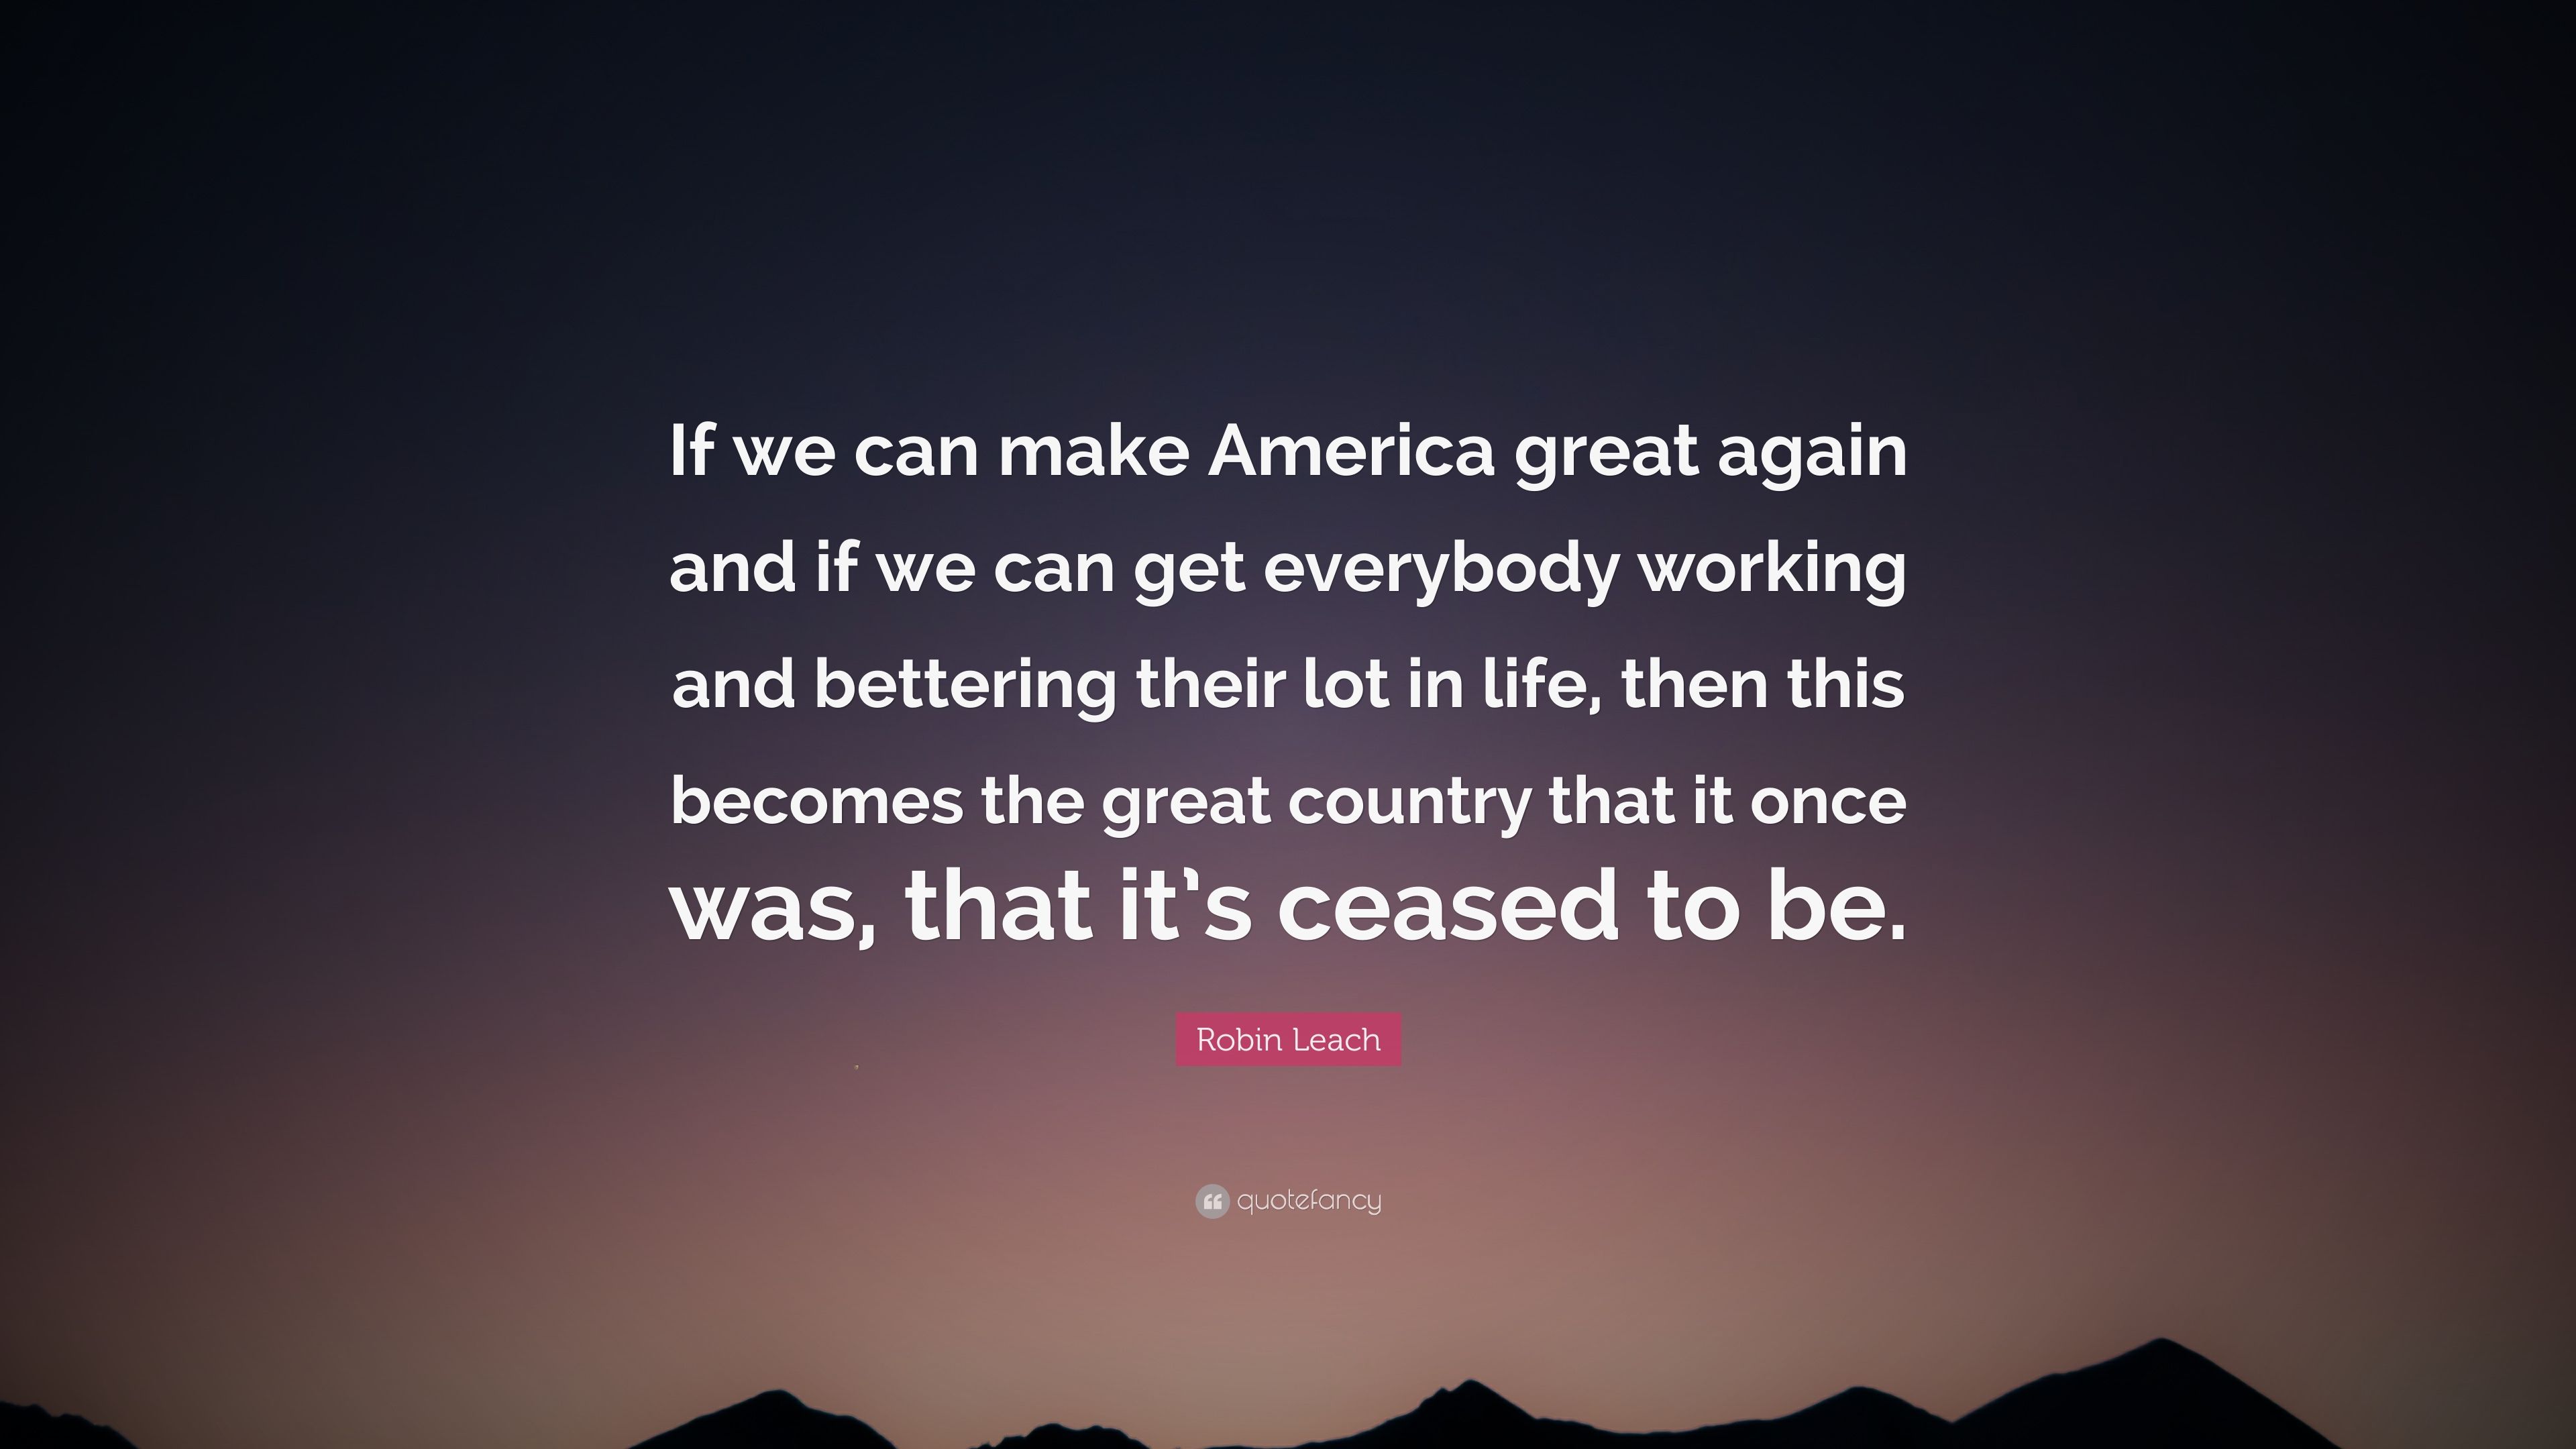 Robin Leach Quote: “If we can make America great again and if we